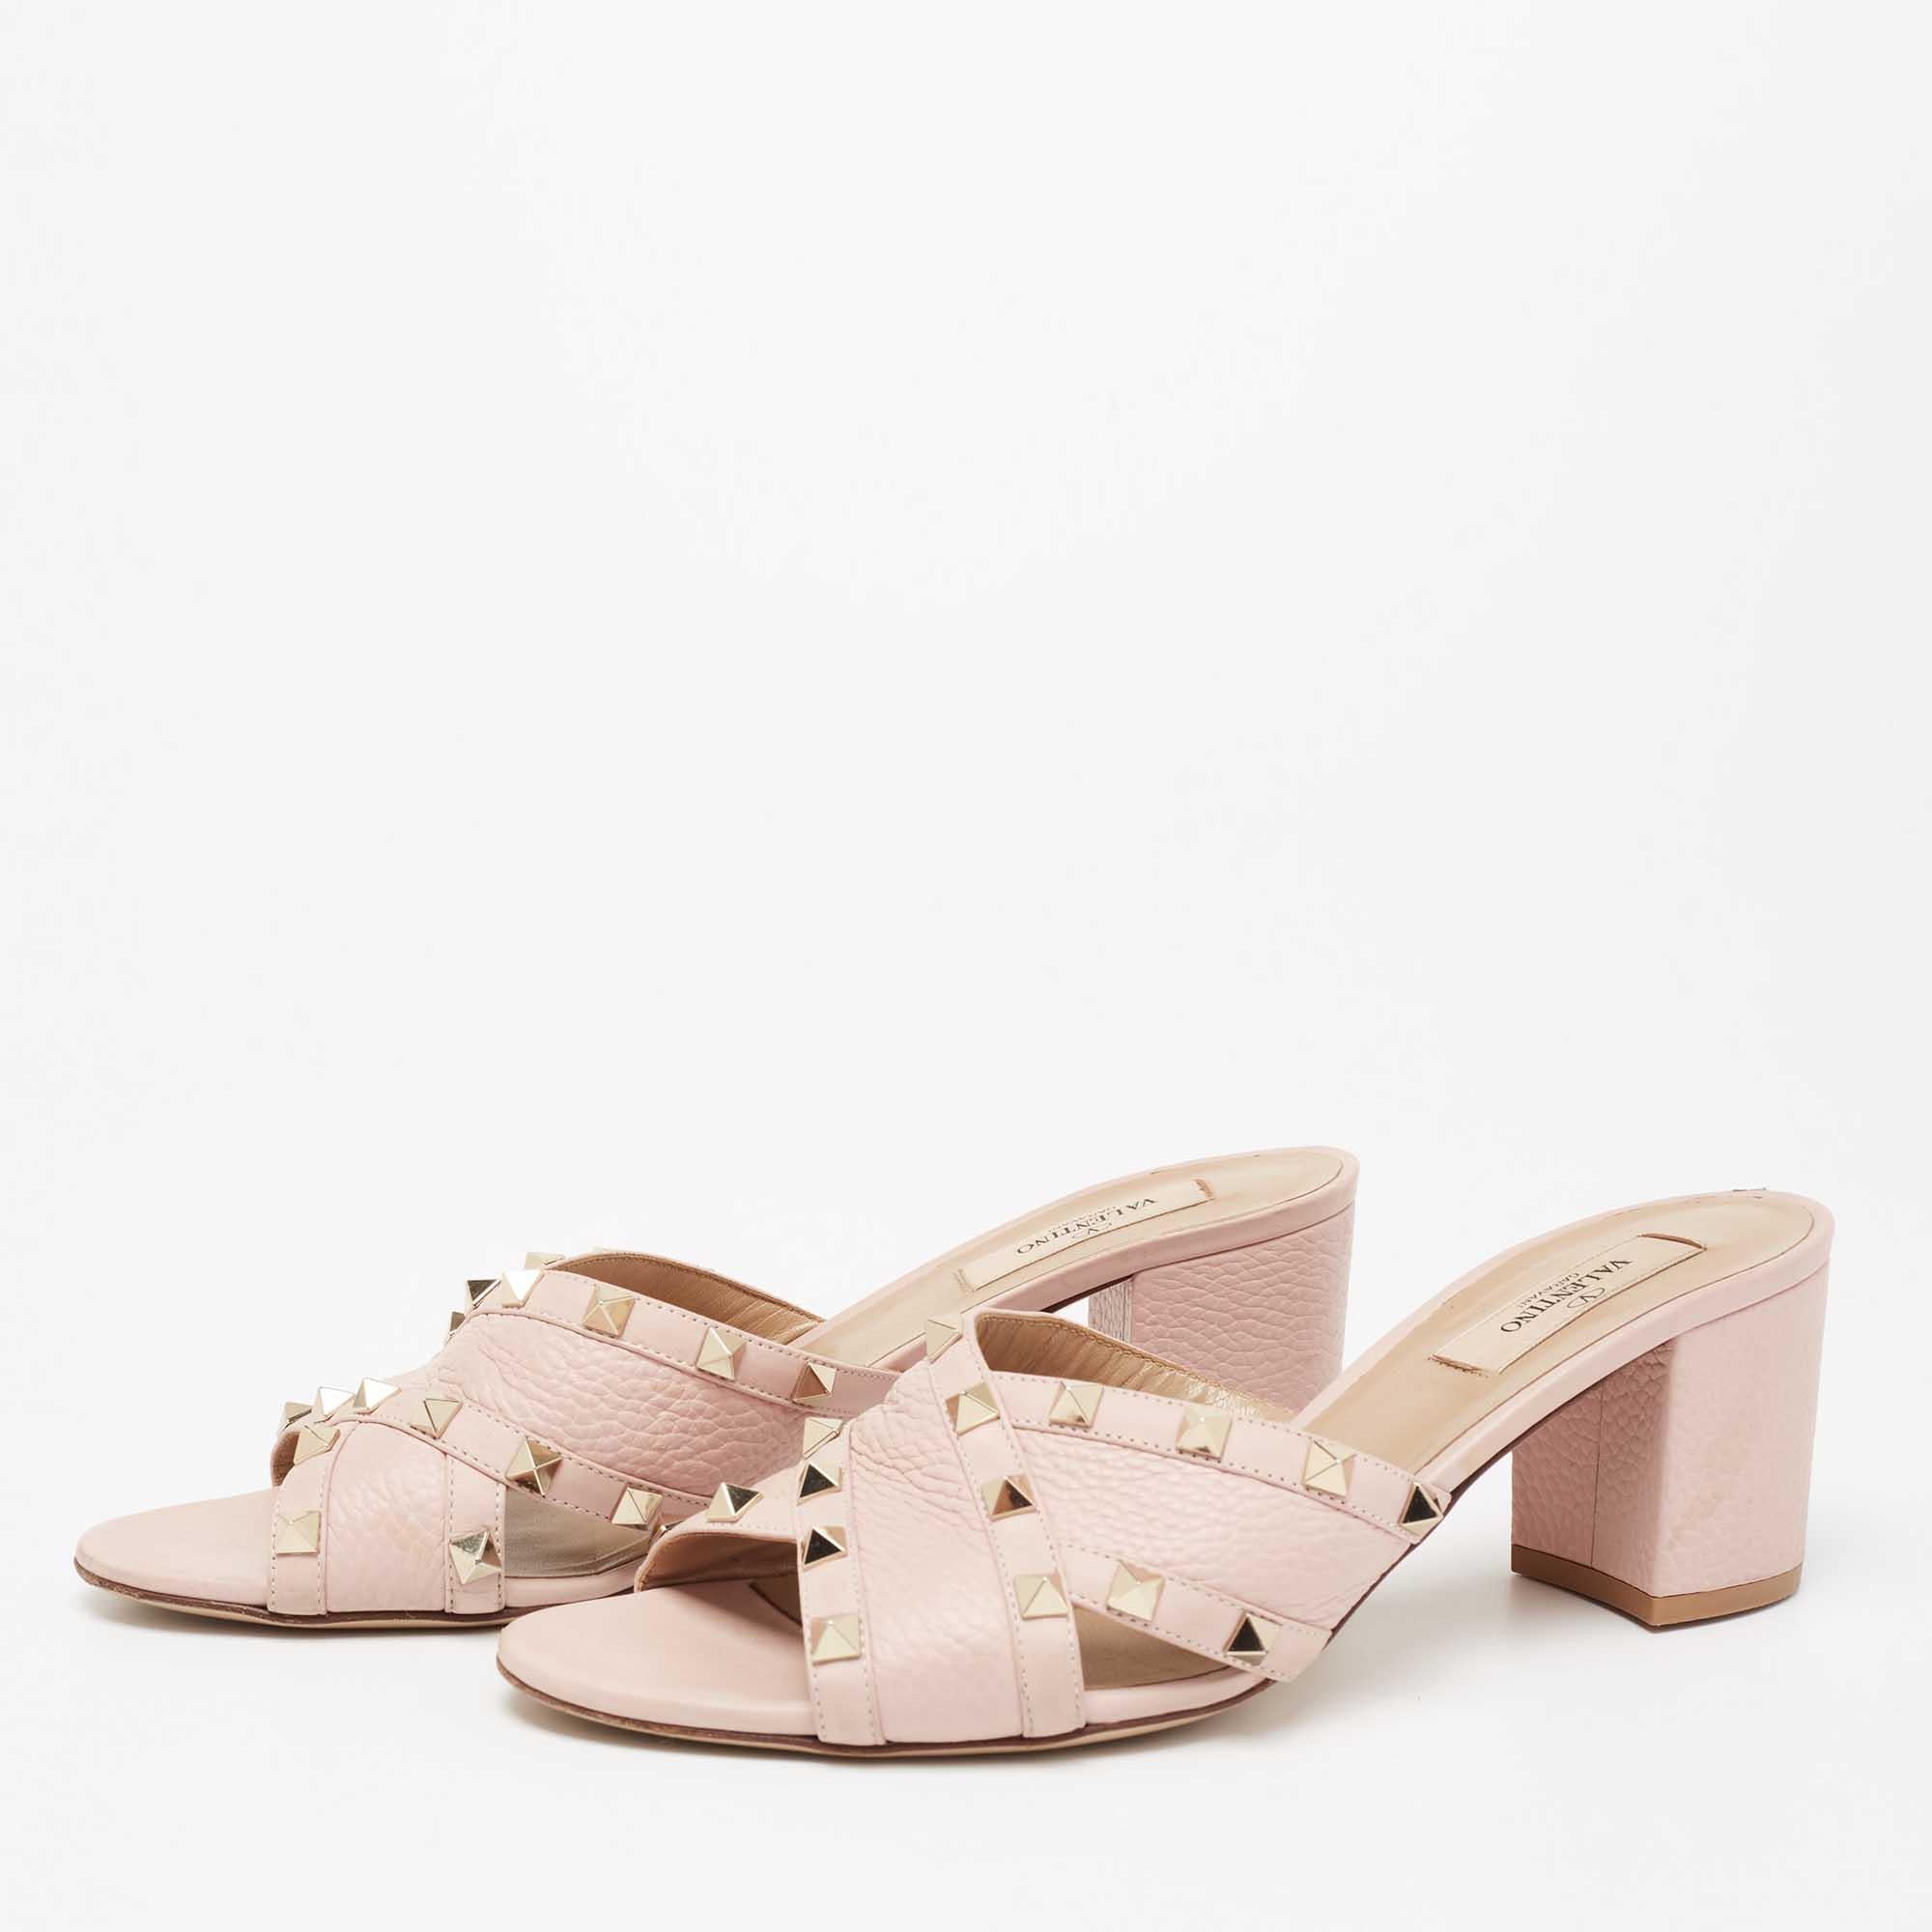 When considering Valentino, three words come to mind: luxurious, bold, and iconic. These gorgeous slide sandals are crafted from leather, and the sleek silhouette is adorned with carefully placed Rockstuds. They can be styled with various outfits in